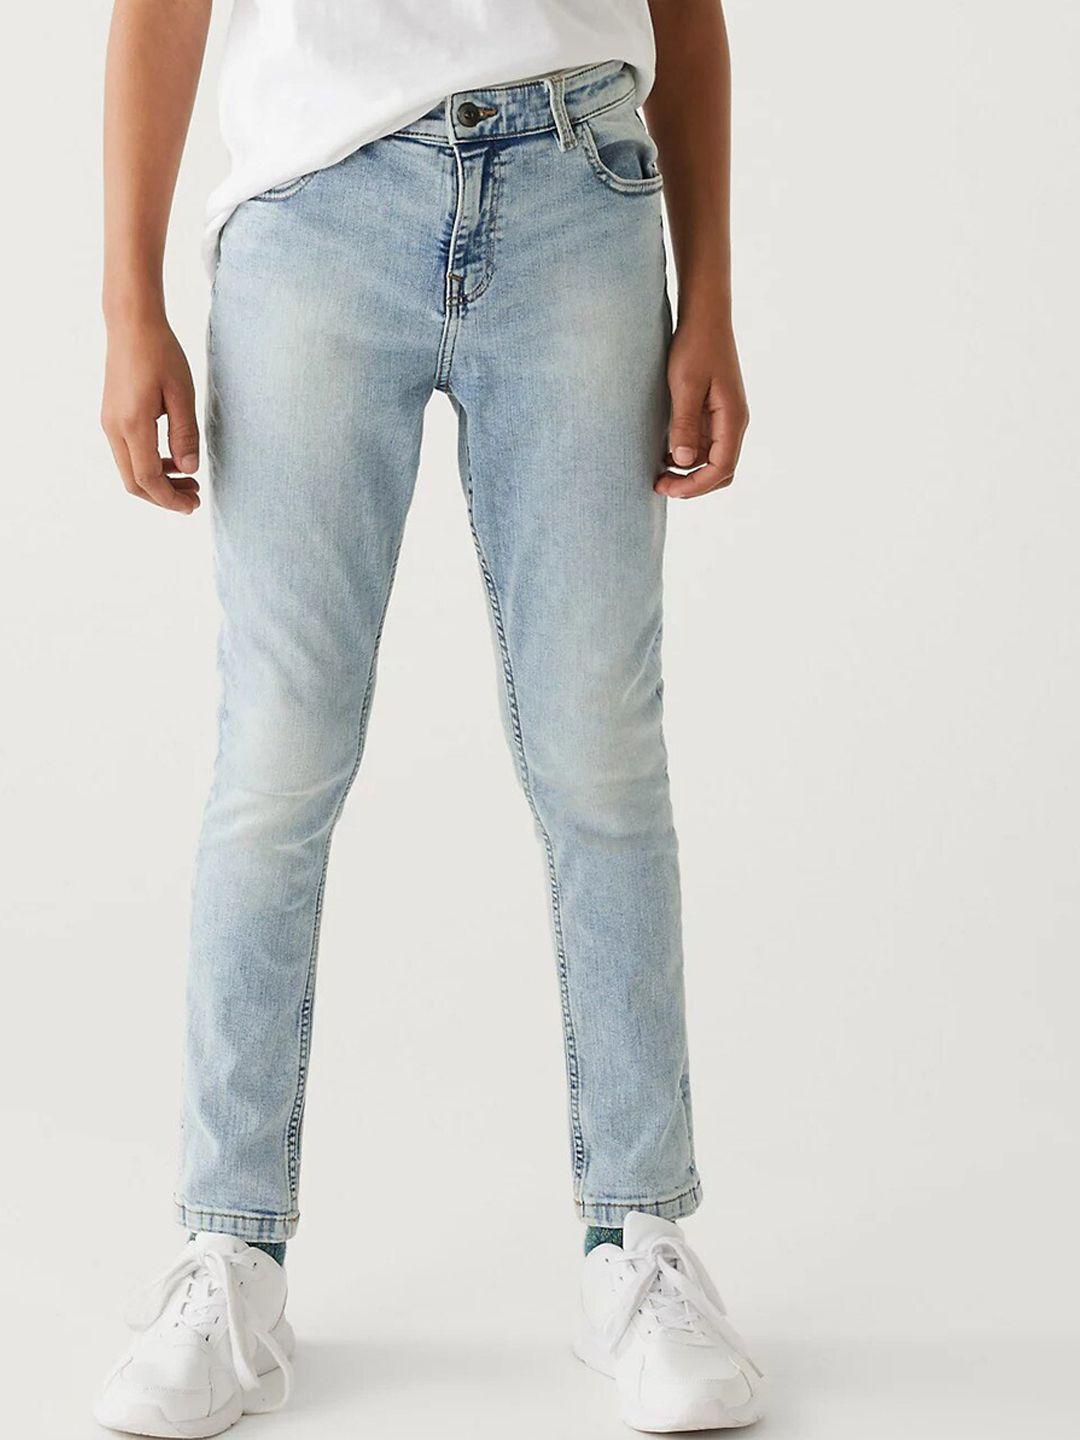 marks & spencer boys skinny fit mildly distressed heavy fade jeans